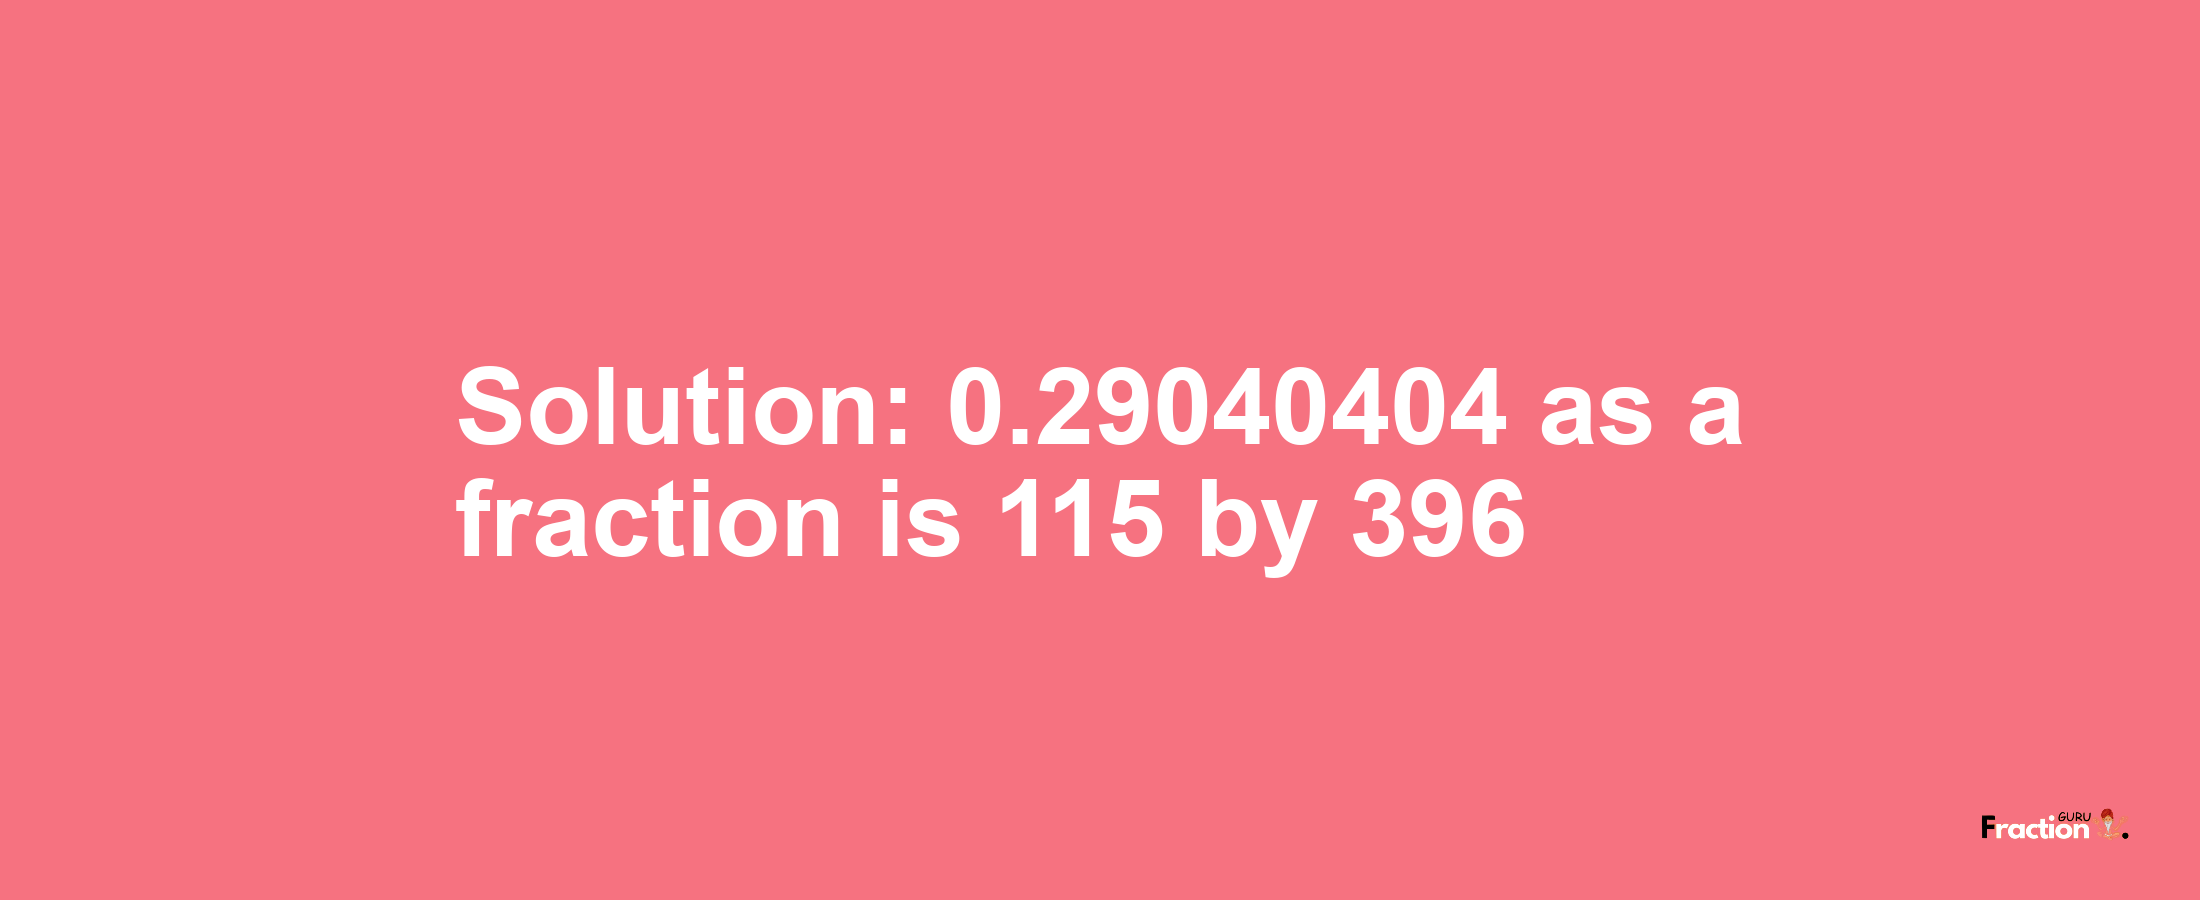 Solution:0.29040404 as a fraction is 115/396